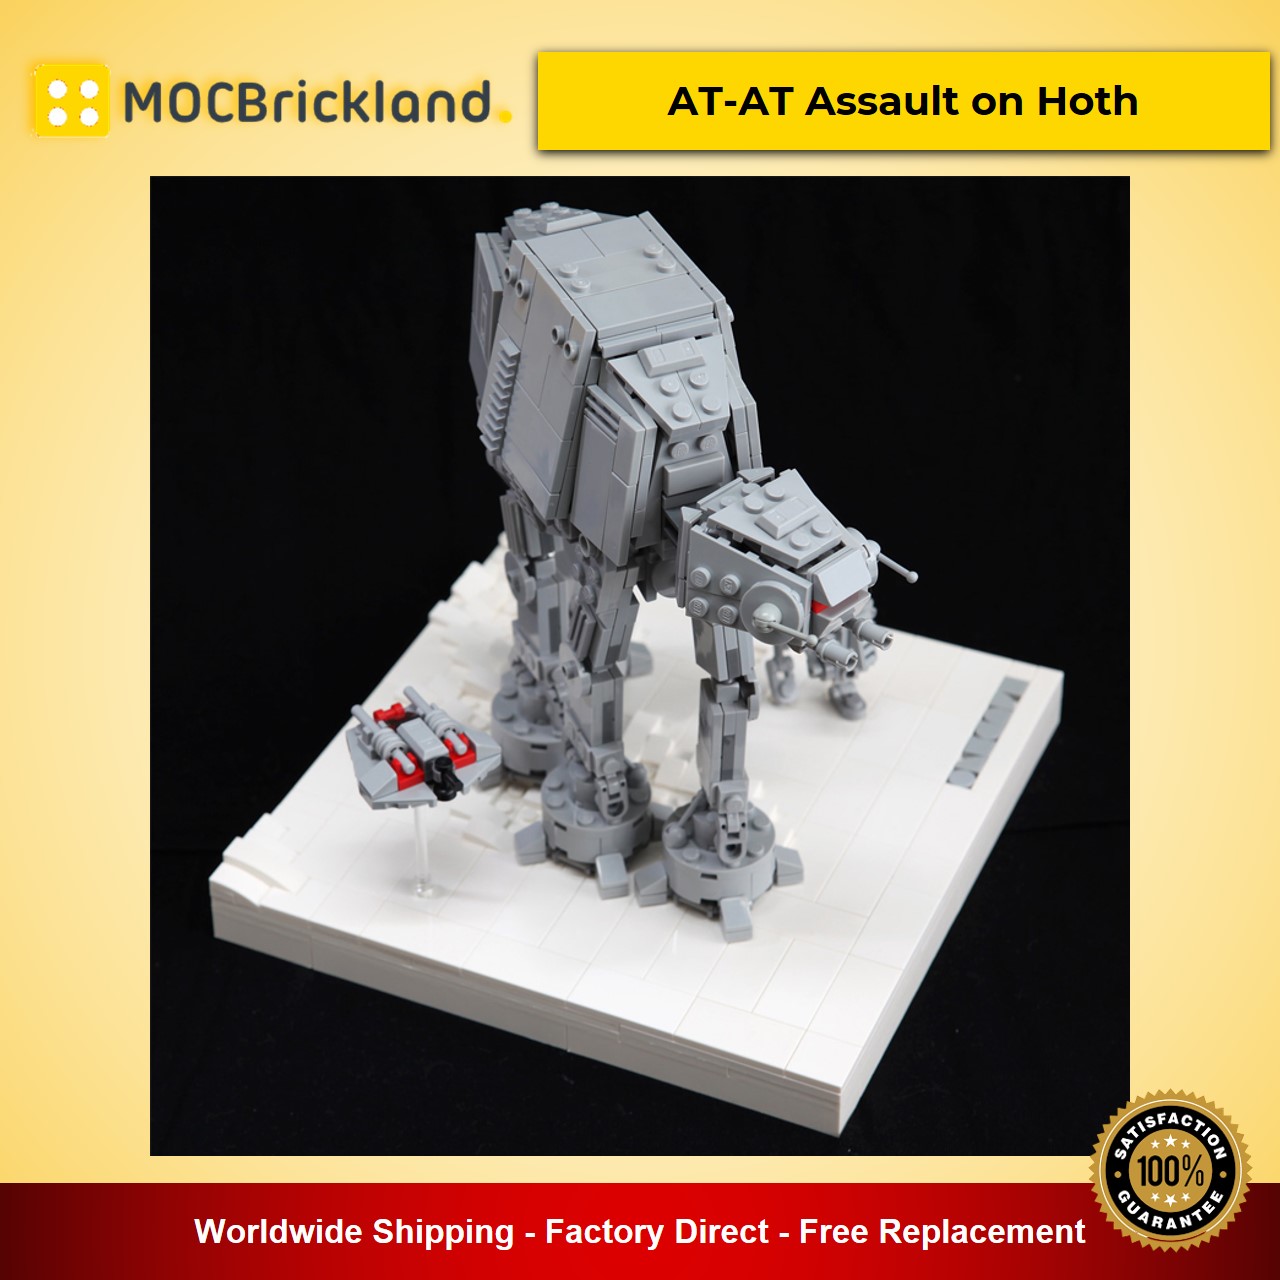 star wars moc 11431 at at assault on hoth by onecase mocbrickland 4313